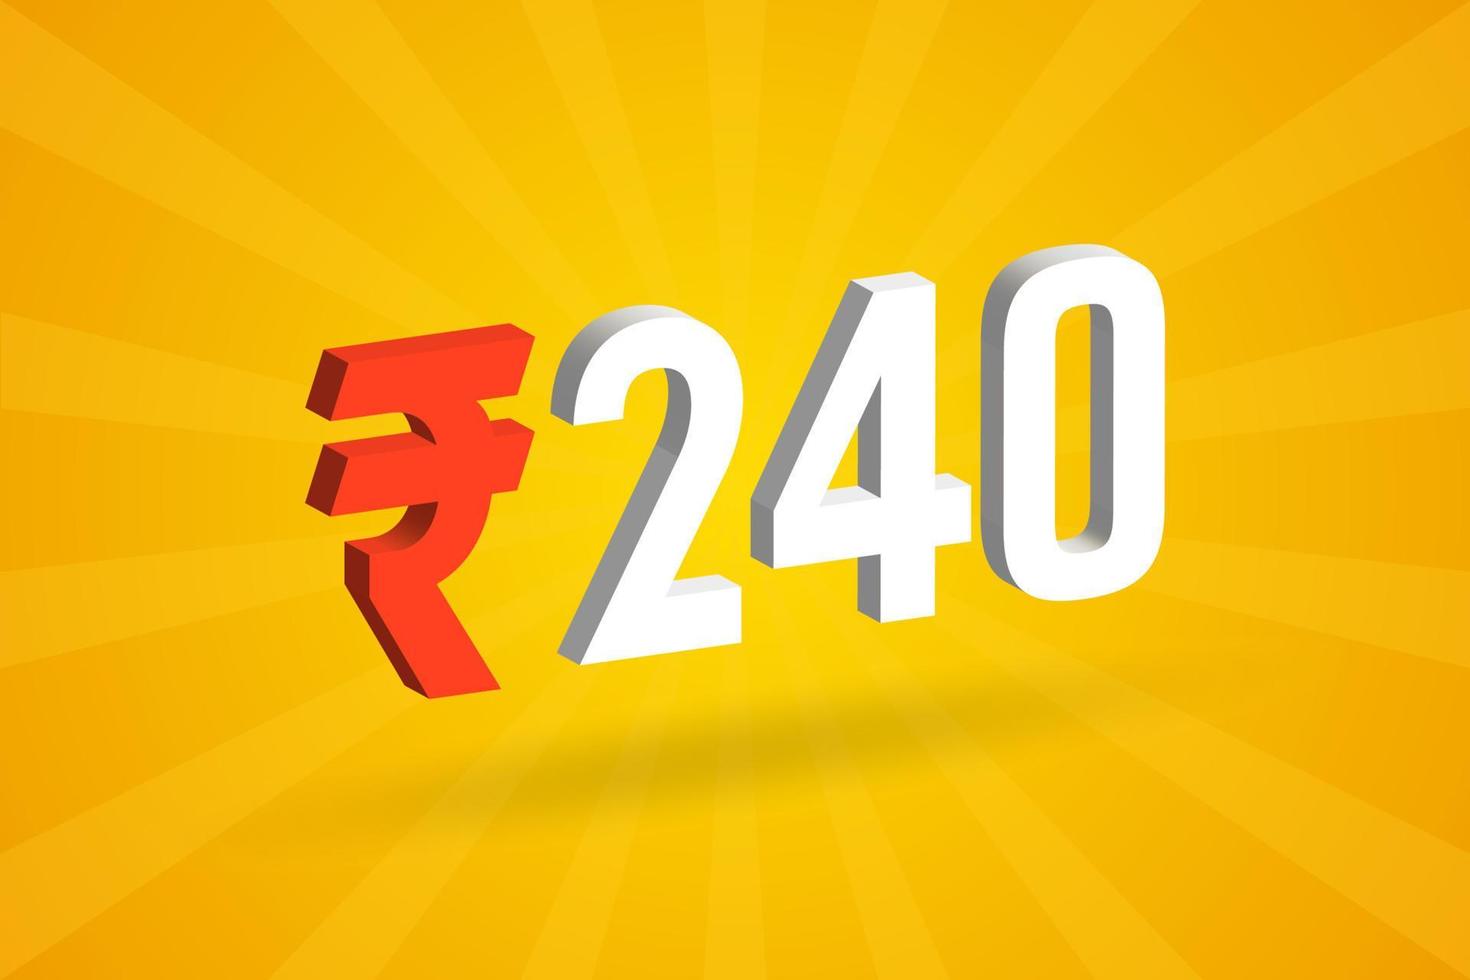 240 Rupee 3D symbol bold text vector image. 3D 240 Indian Rupee currency sign vector illustration